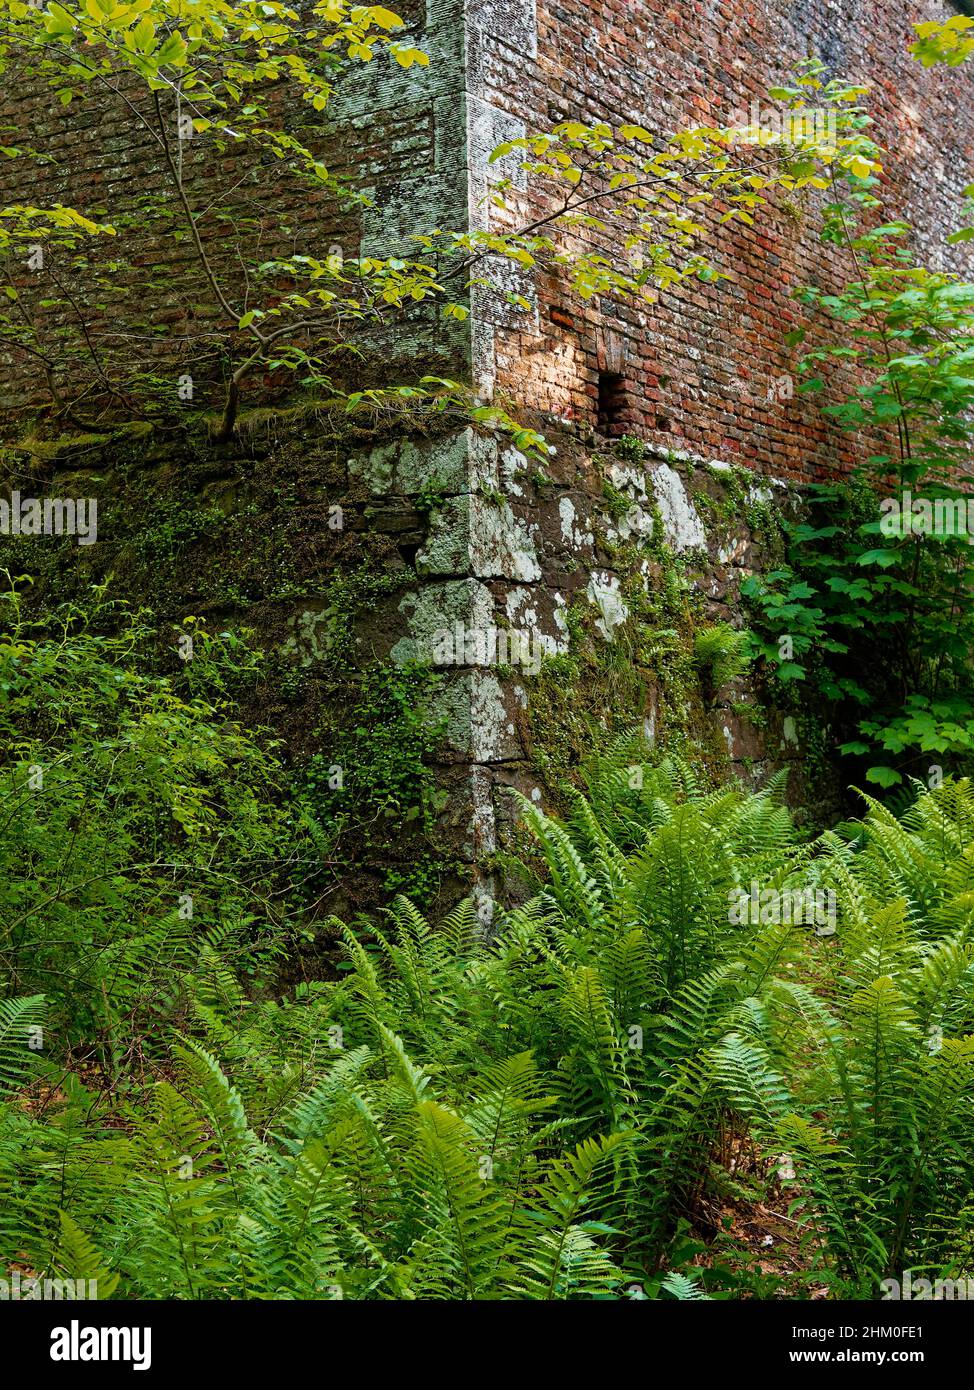 The corner stonework and brick wall of the hidden Nursery and walled Garden within the Woods of Dunnottar north of Stonehaven. Stock Photo